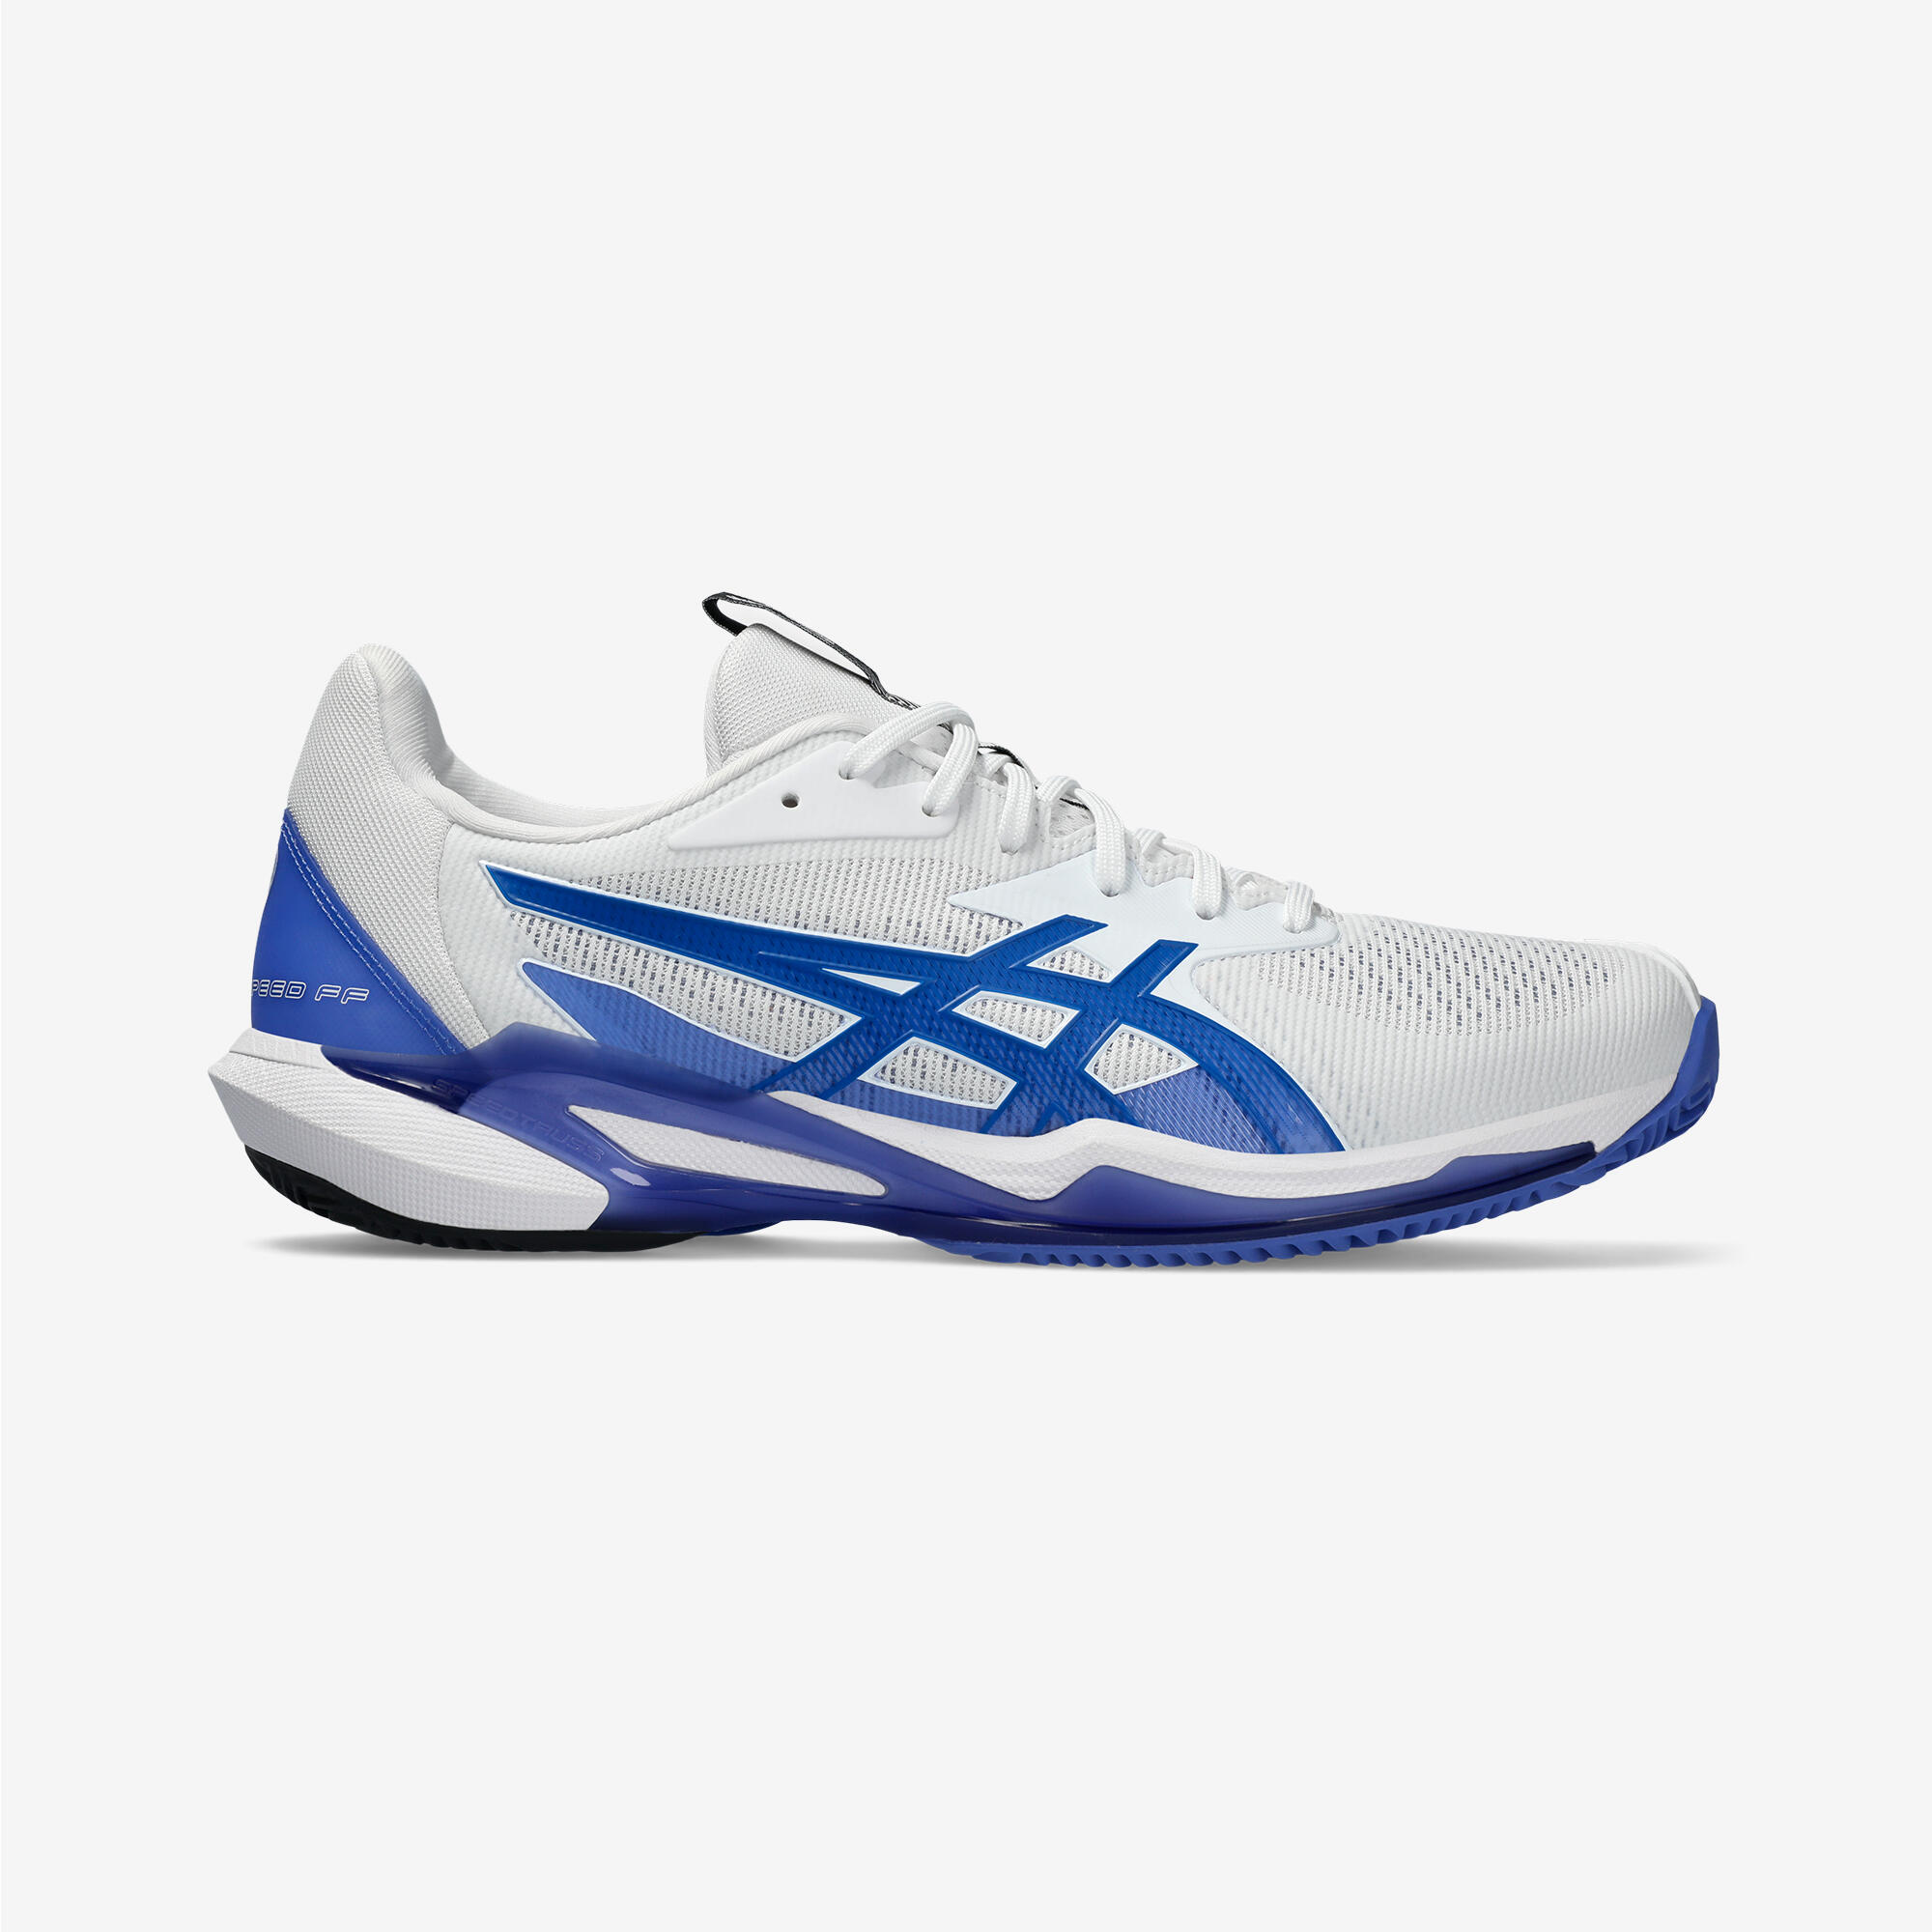 ASICS Men's Clay Court Tennis Shoes Gel-solution Speed Ff 3 - White